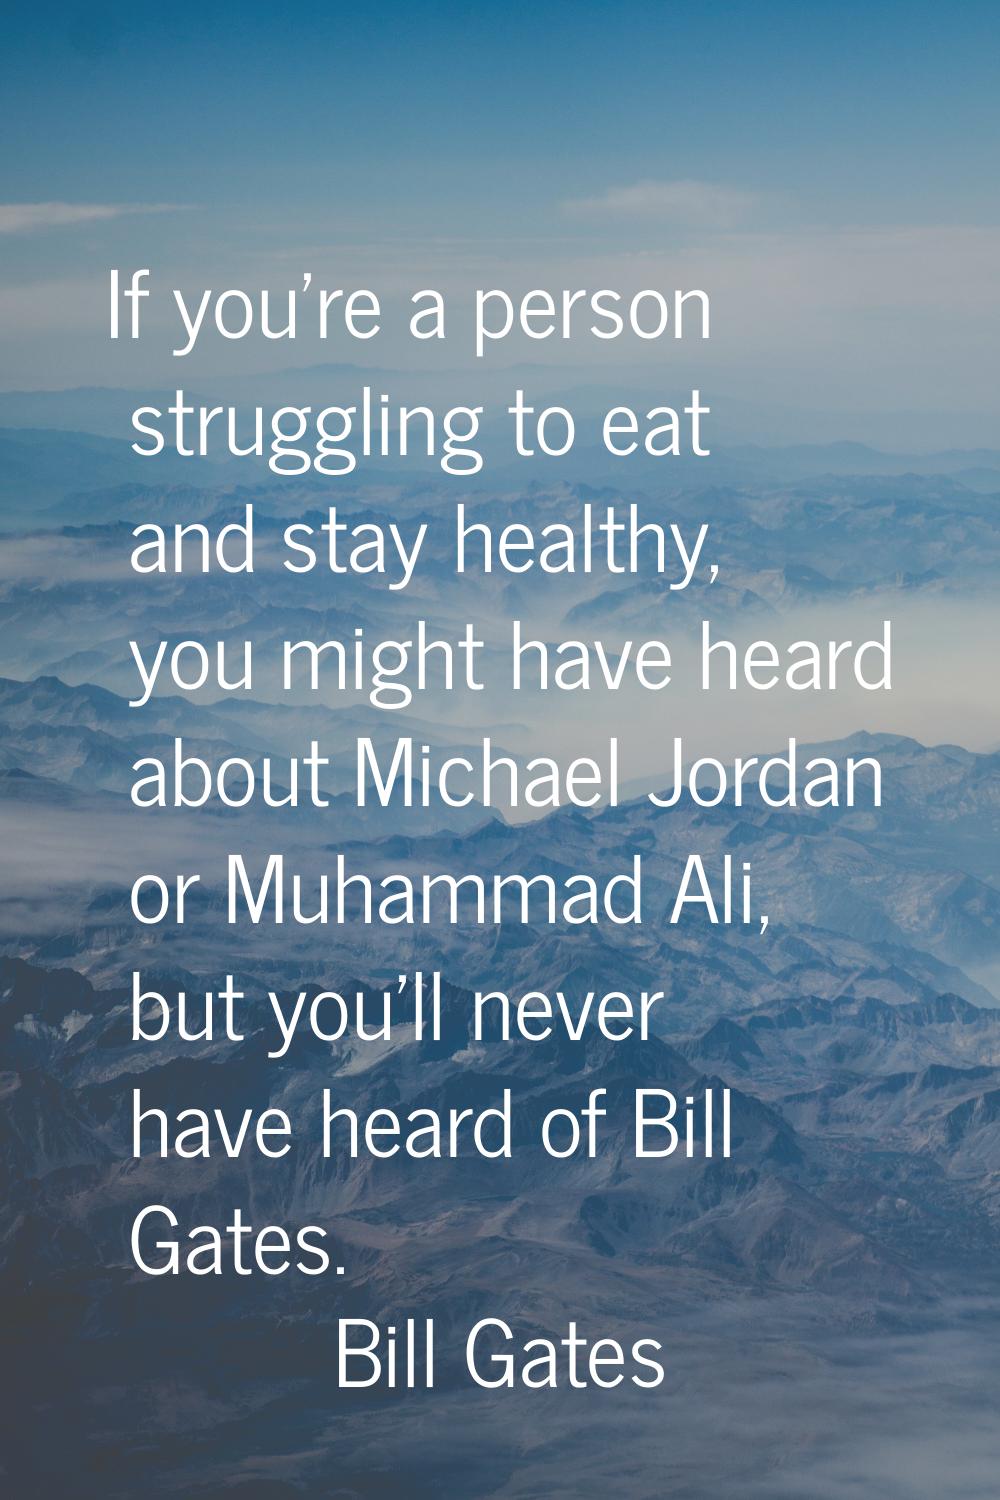 If you're a person struggling to eat and stay healthy, you might have heard about Michael Jordan or